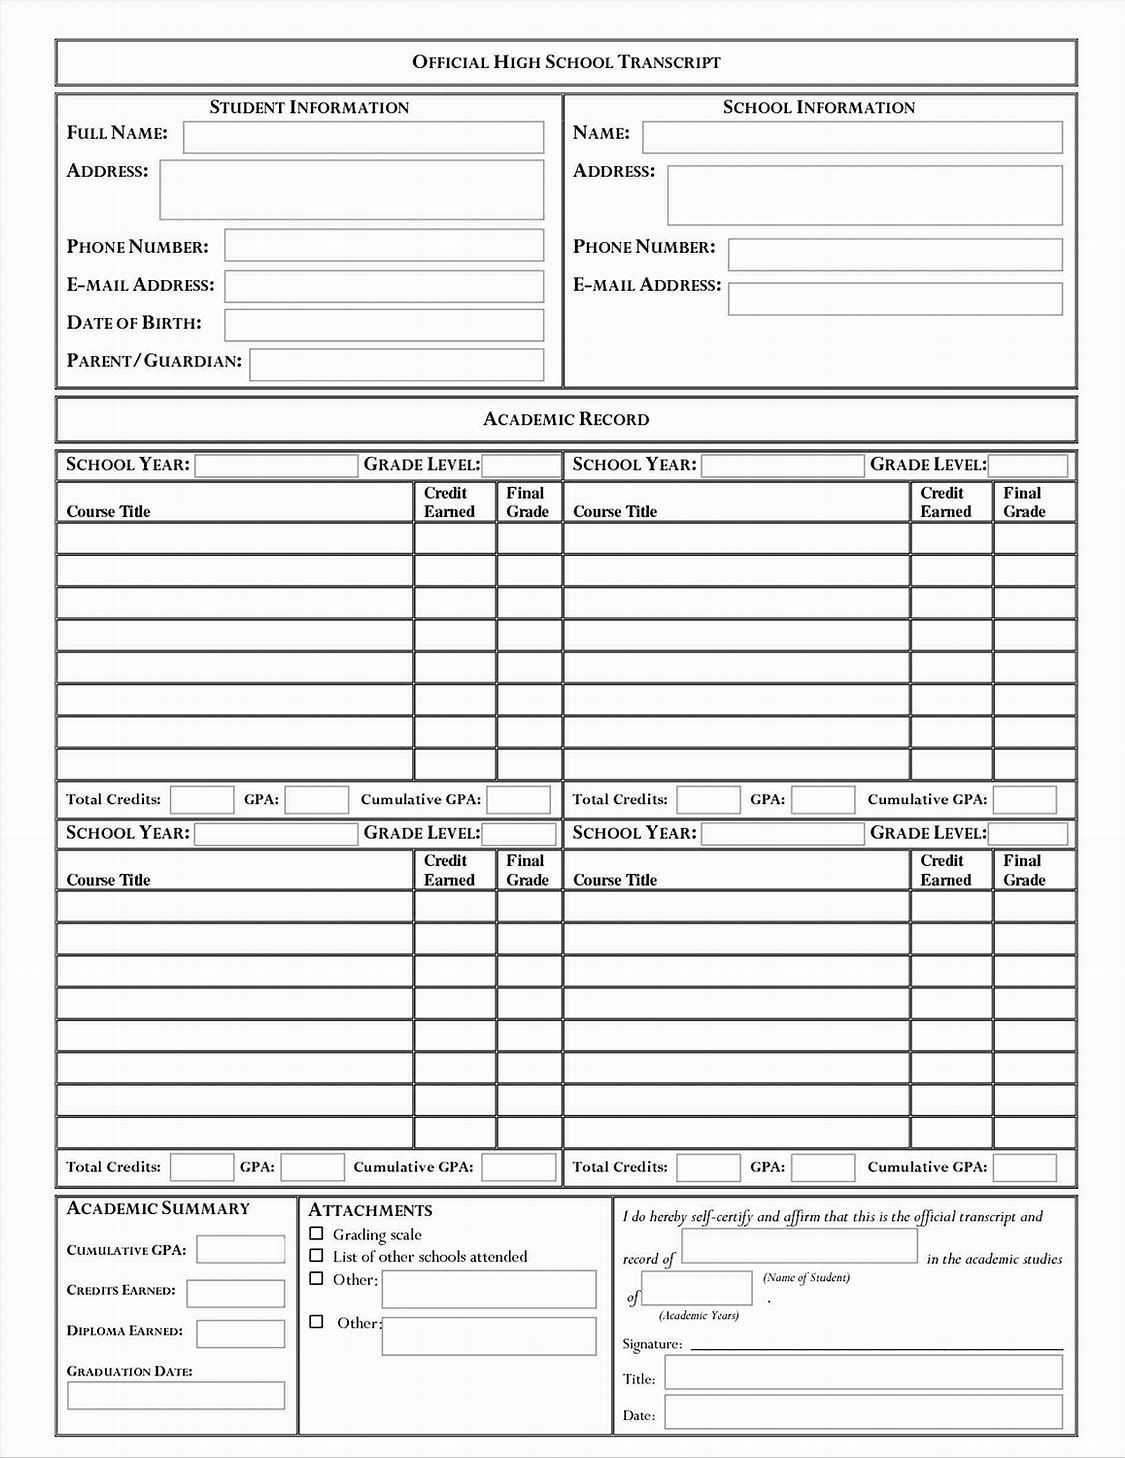 Image Result For Middle School Transcript Template | High Intended For Homeschool Report Card Template Middle School